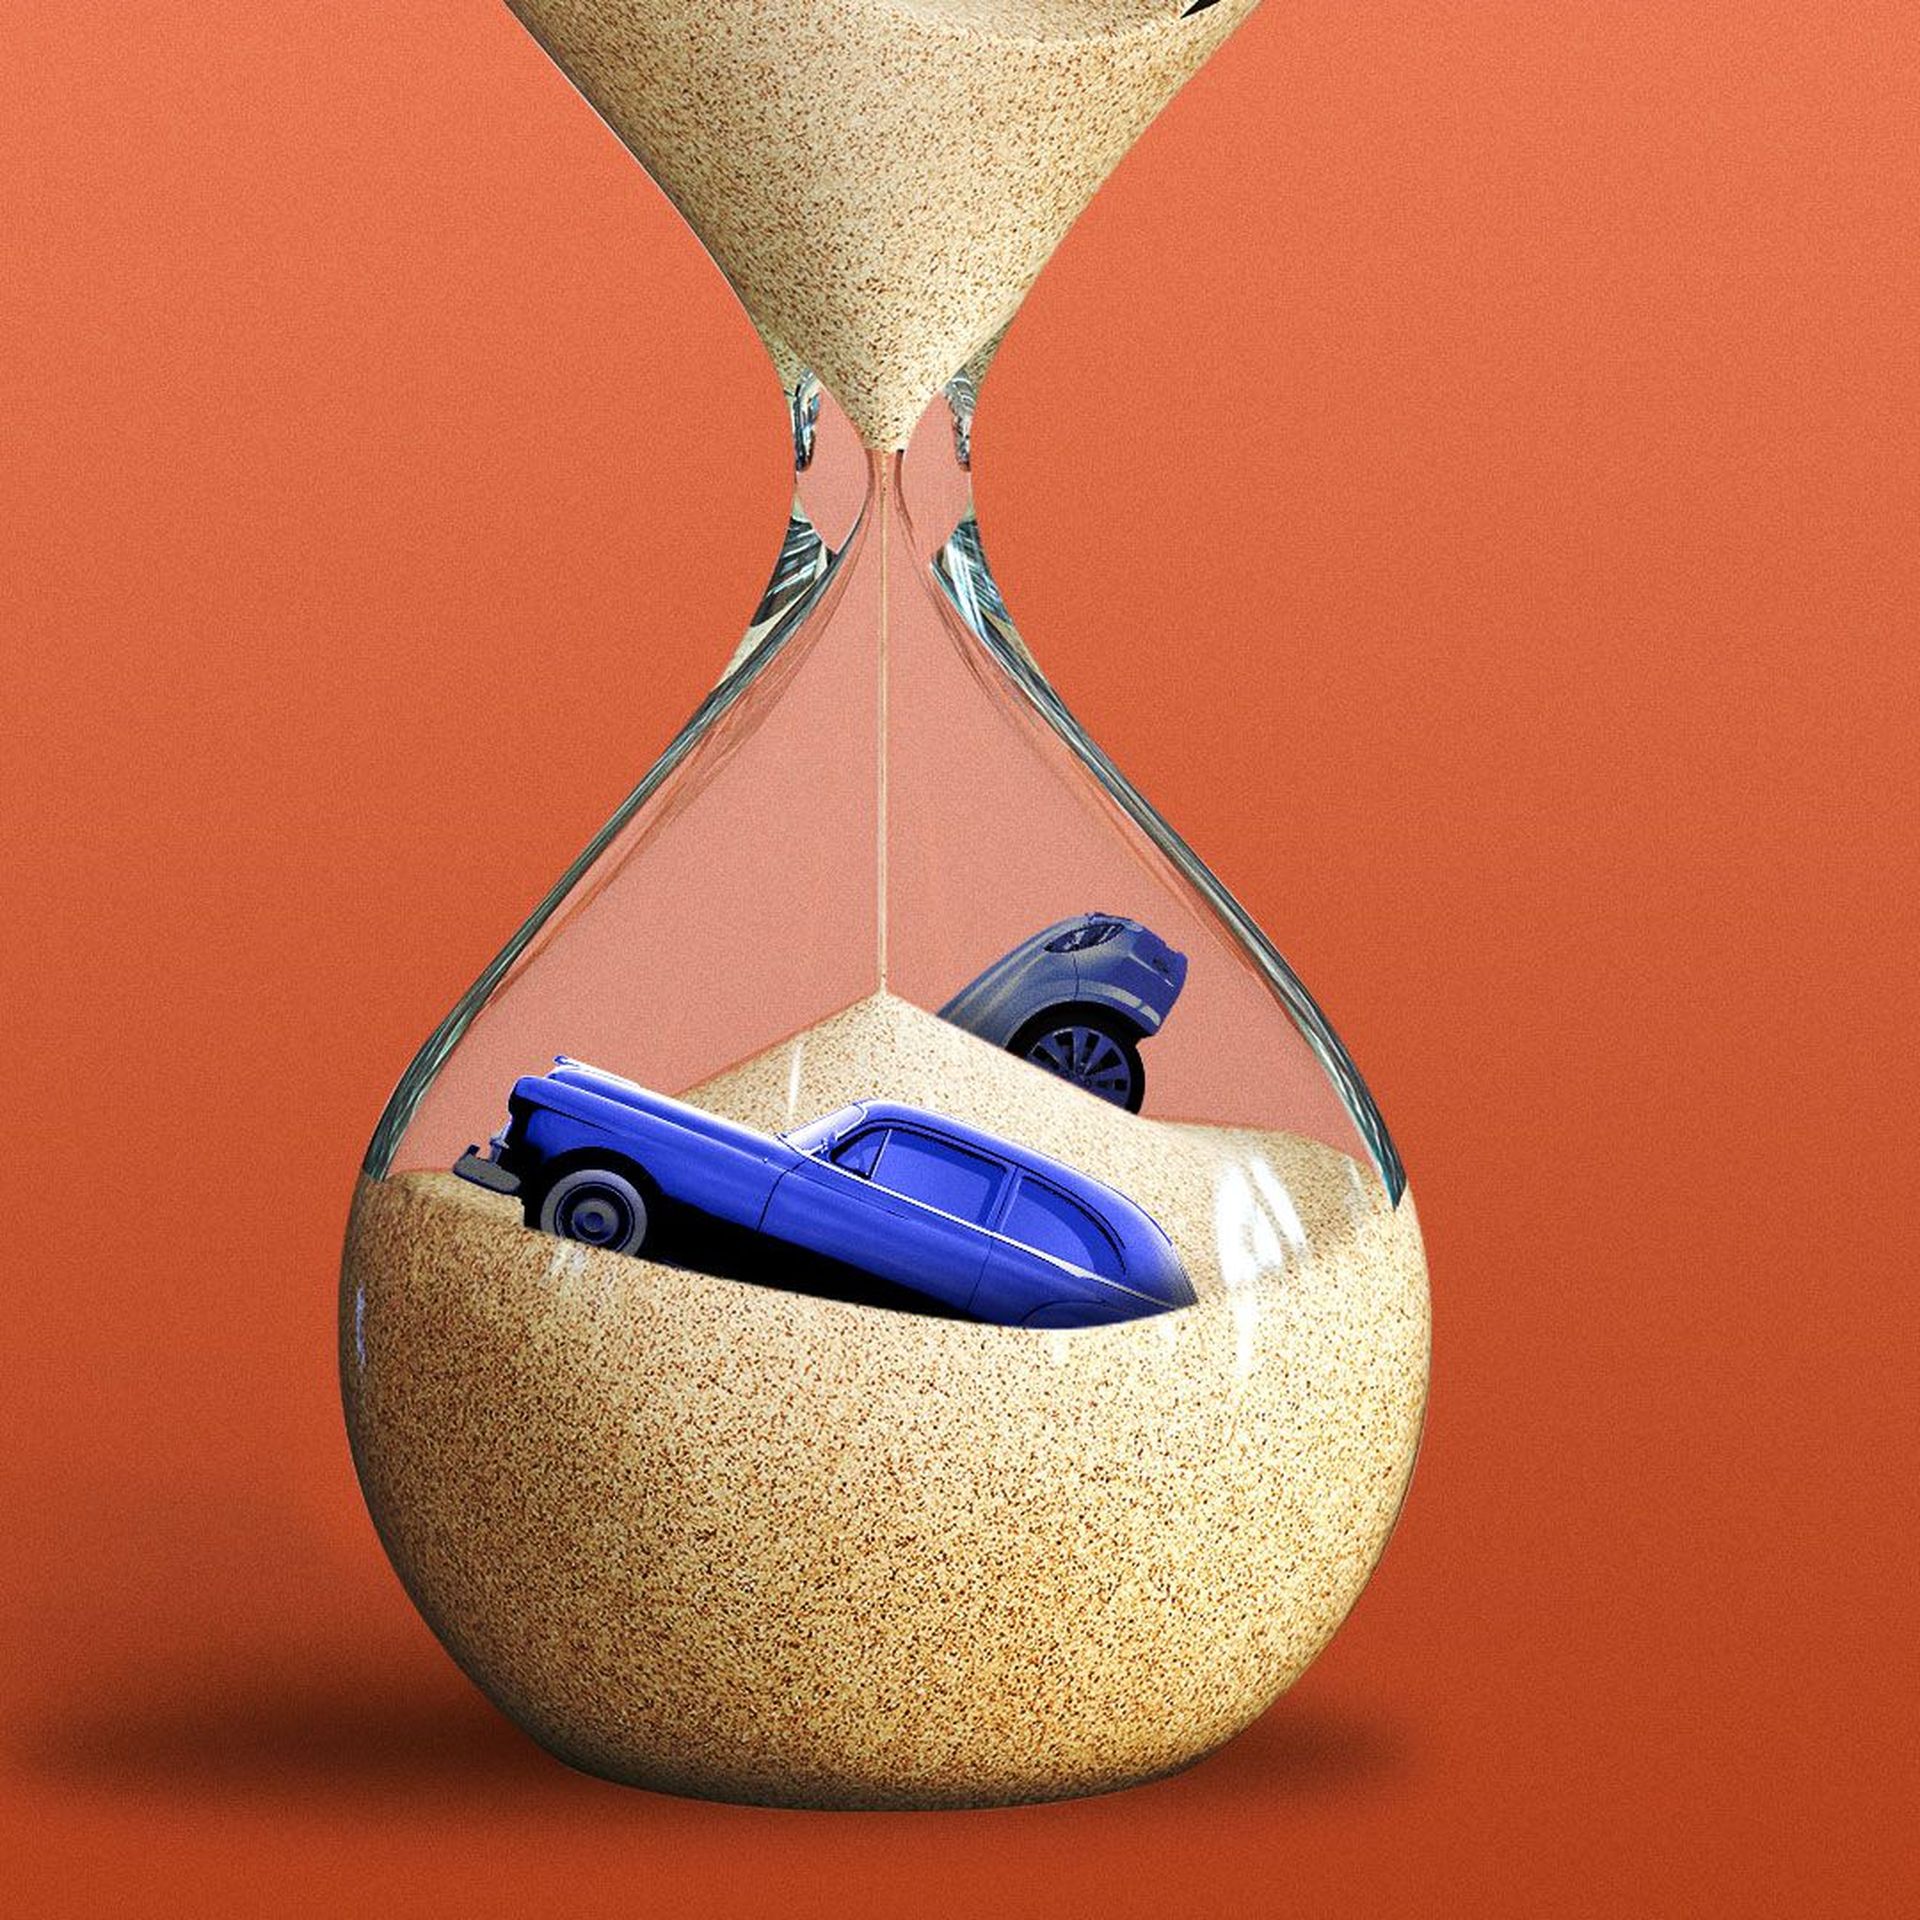 Illustration of cars under the sands of an hourglass